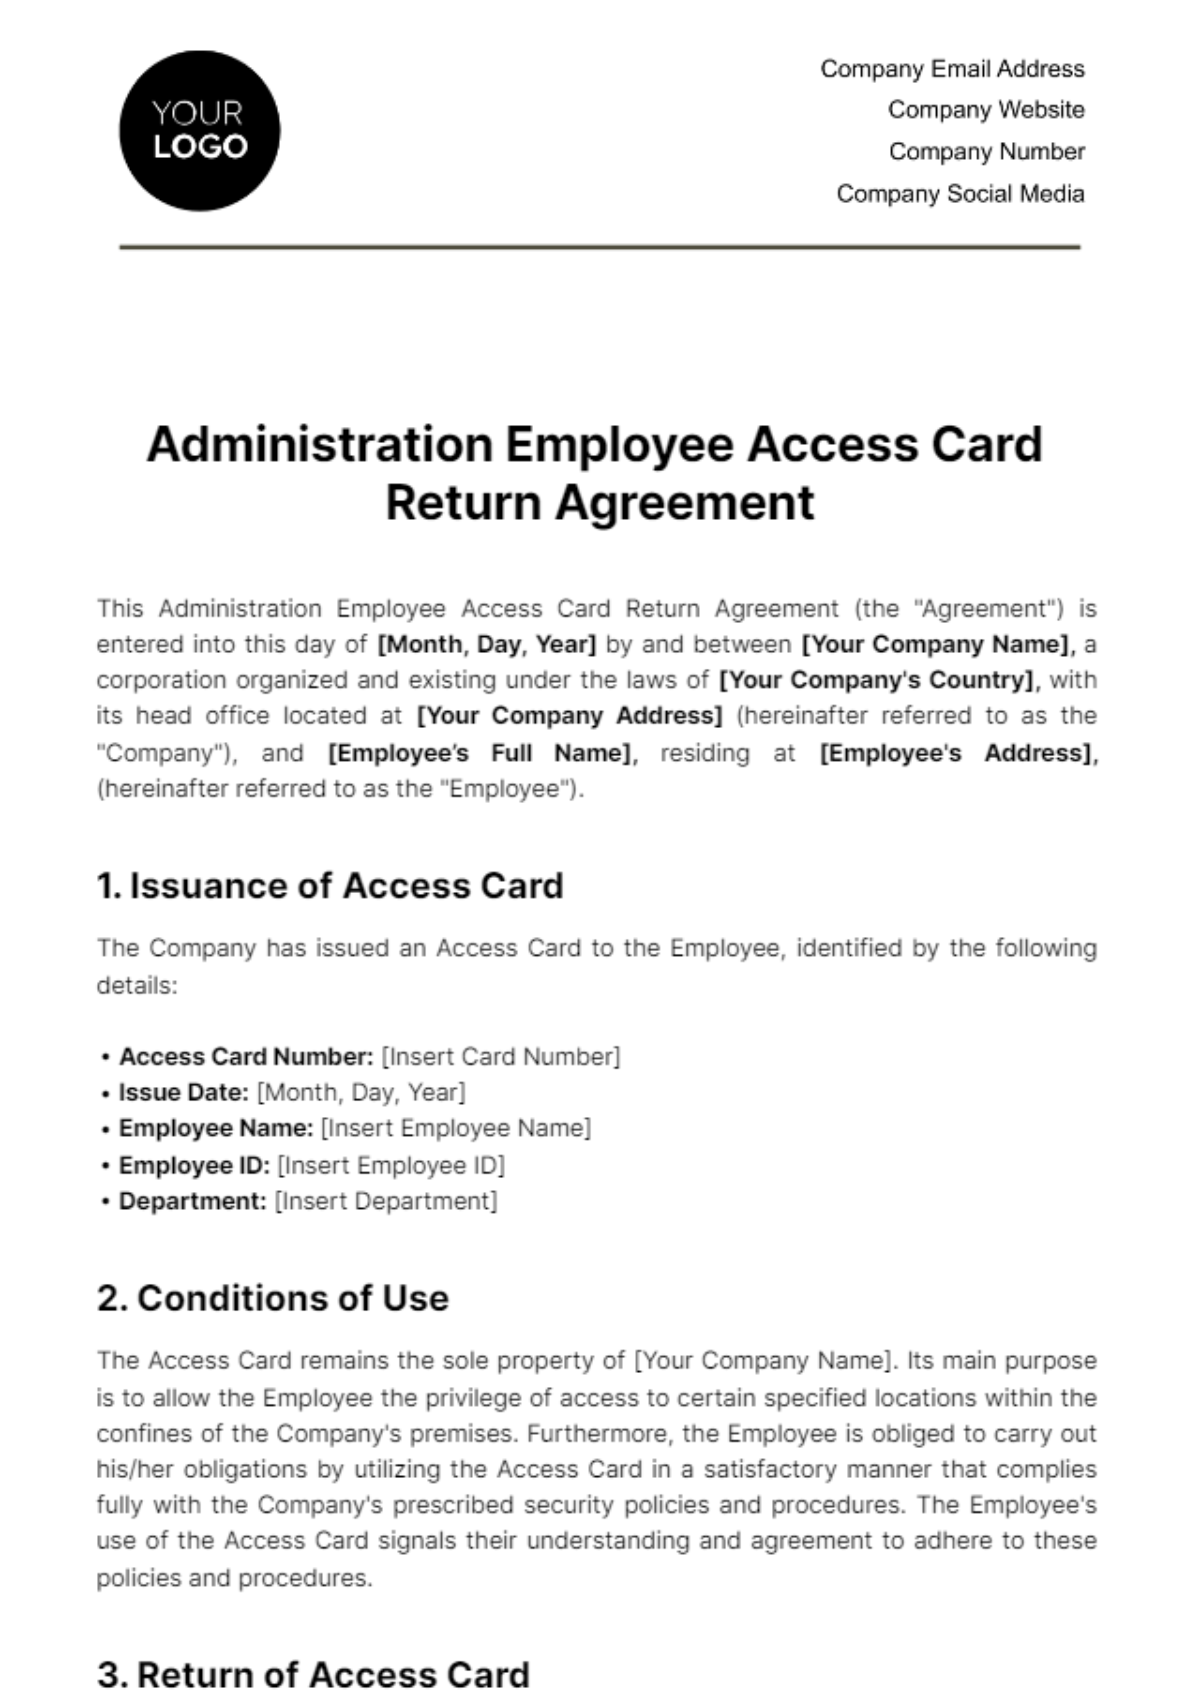 Free Administration Employee Access Card Return Agreement Template